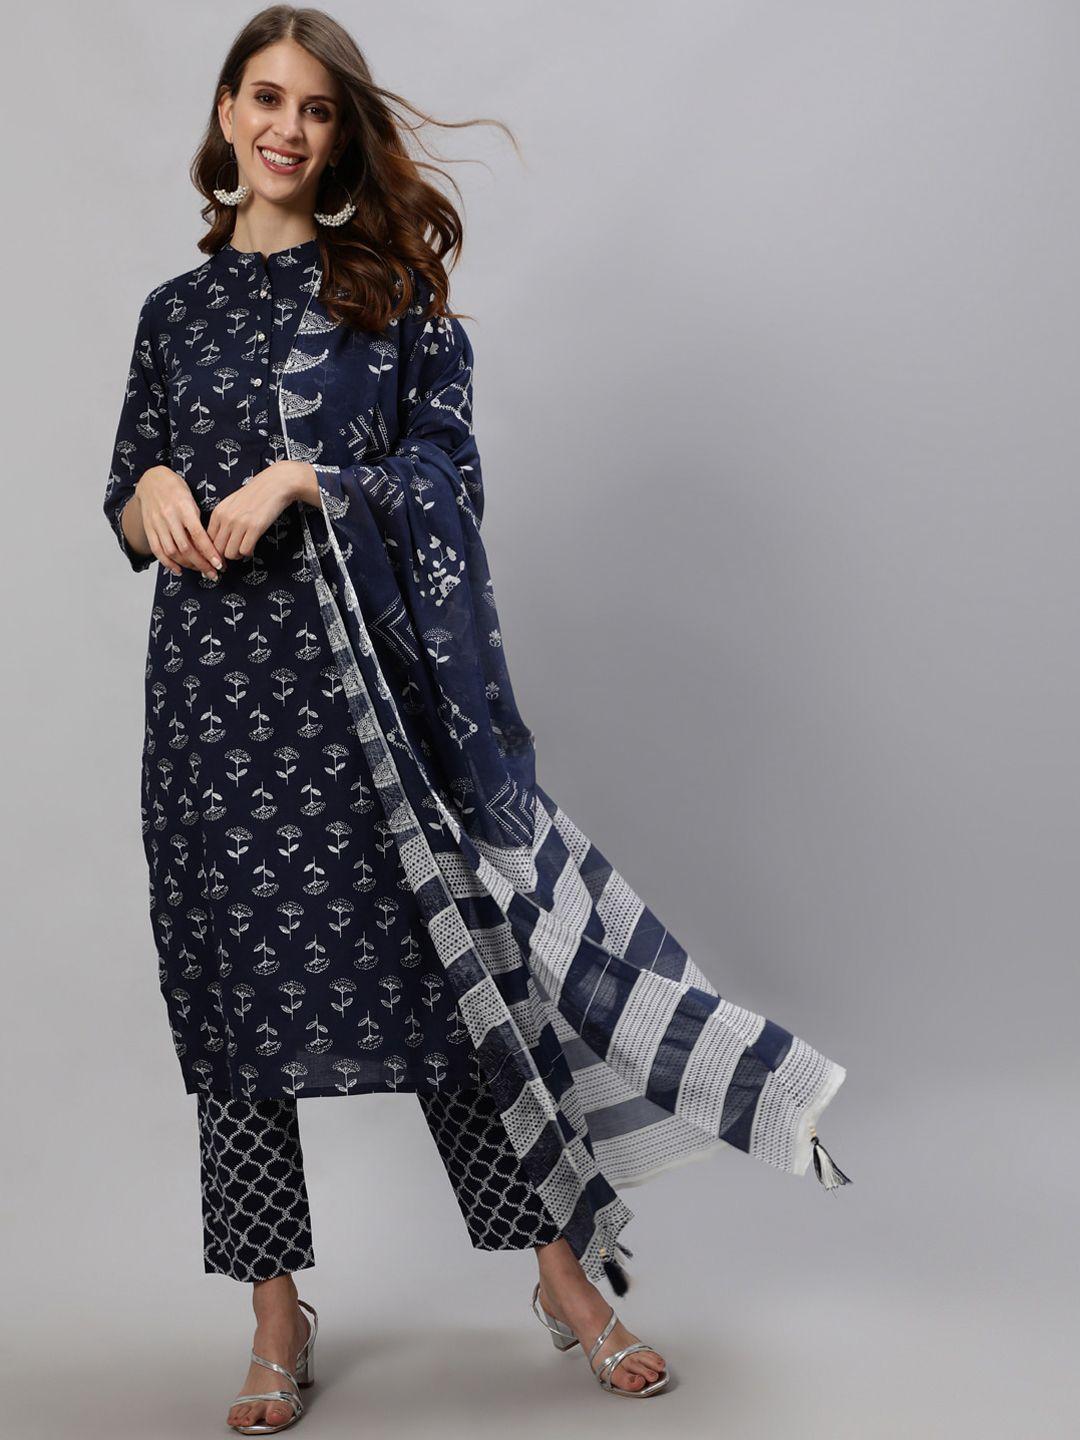 anubhutee-women-navy-blue-&-white-floral-printed-kurta-with-trousers-&-dupatta